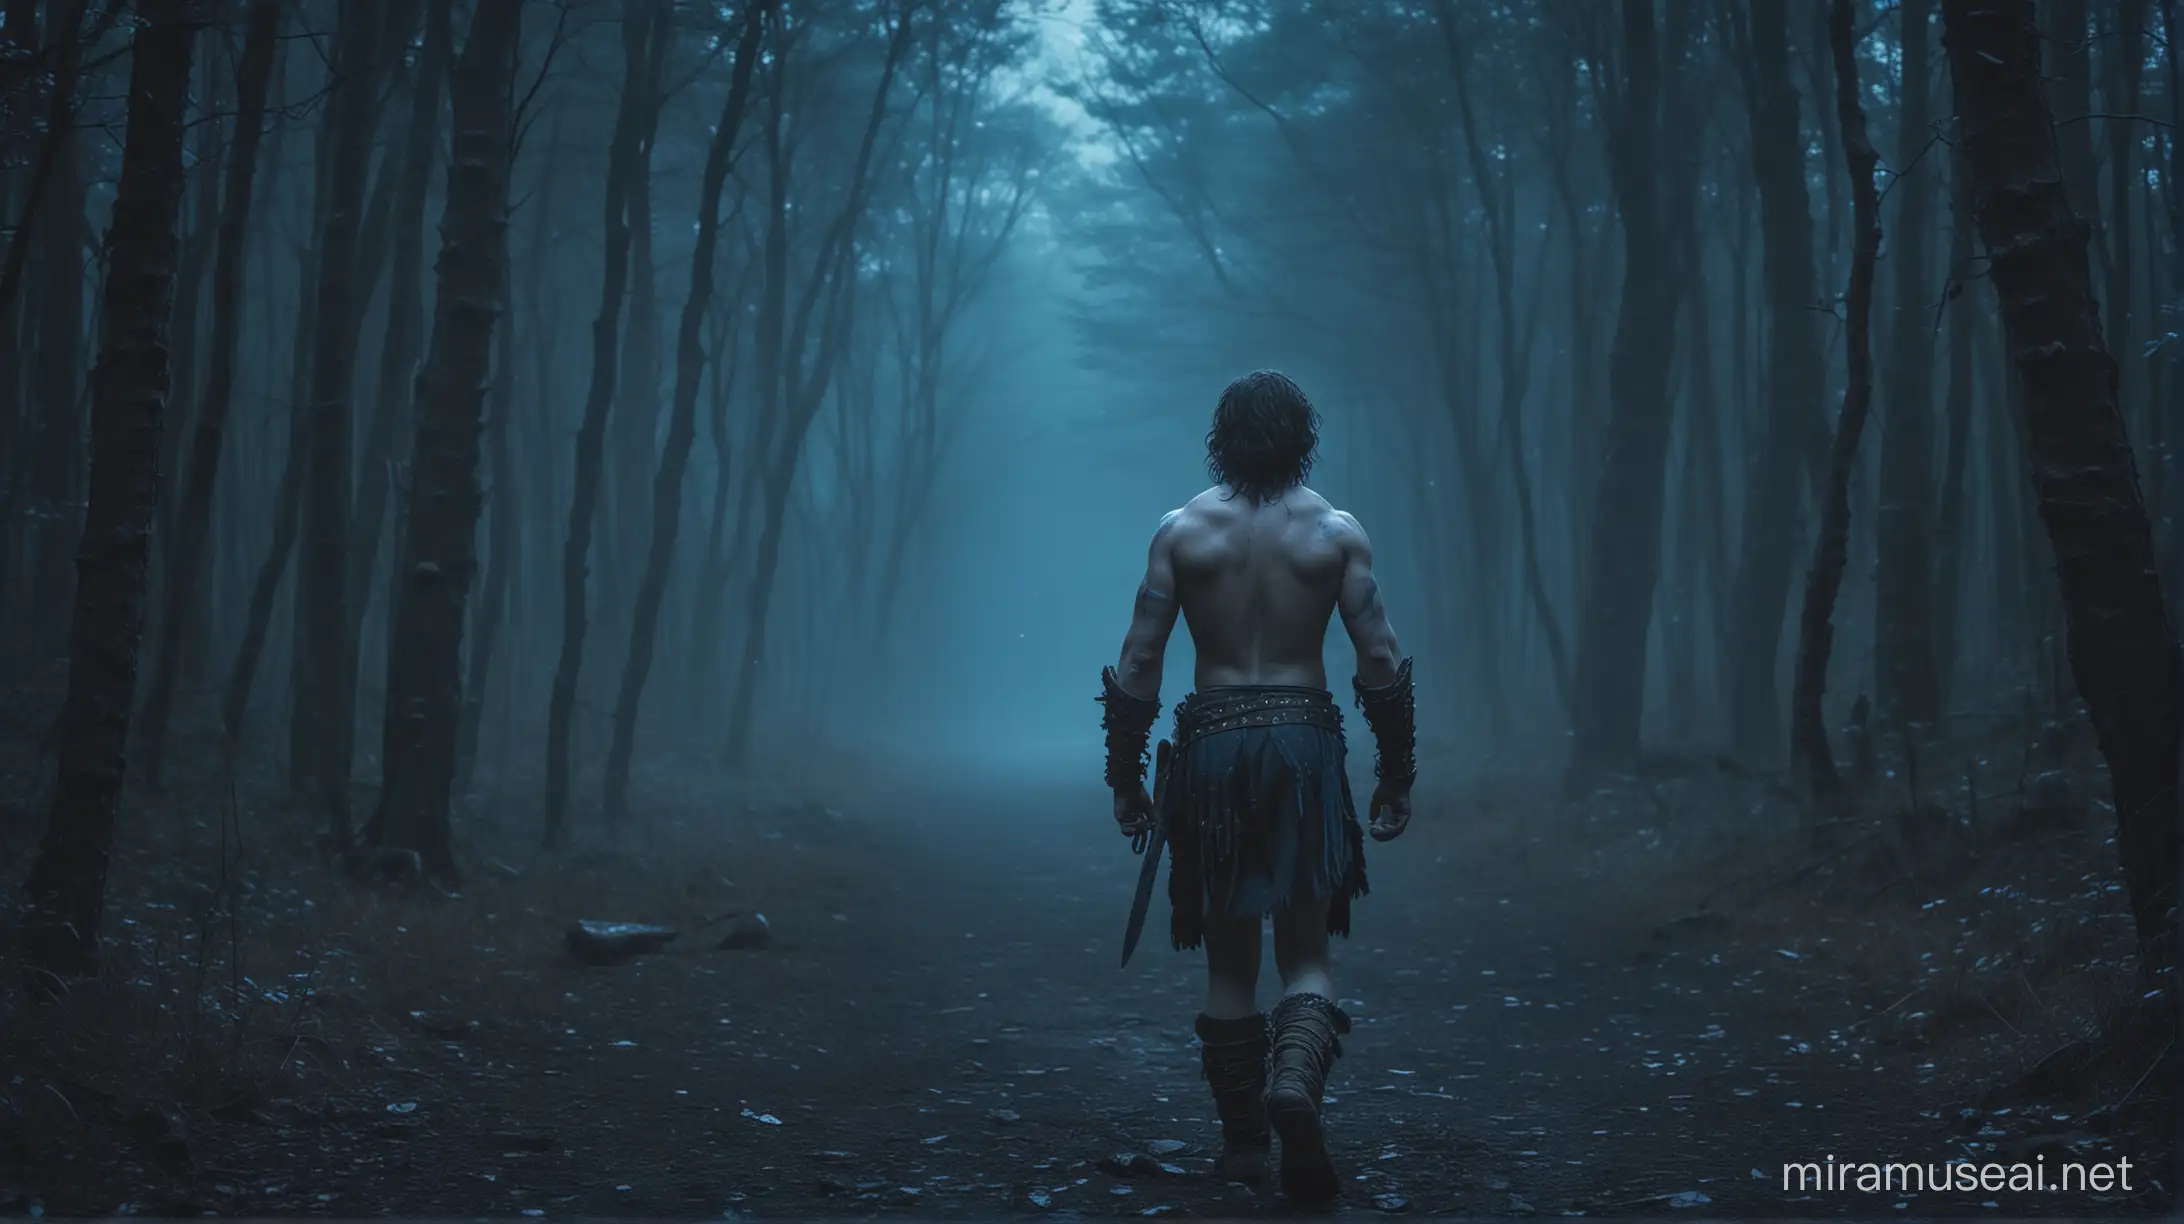 Mystical Night Stroll Young Barbarian Explores Enchanted Forest in Twilight Hues